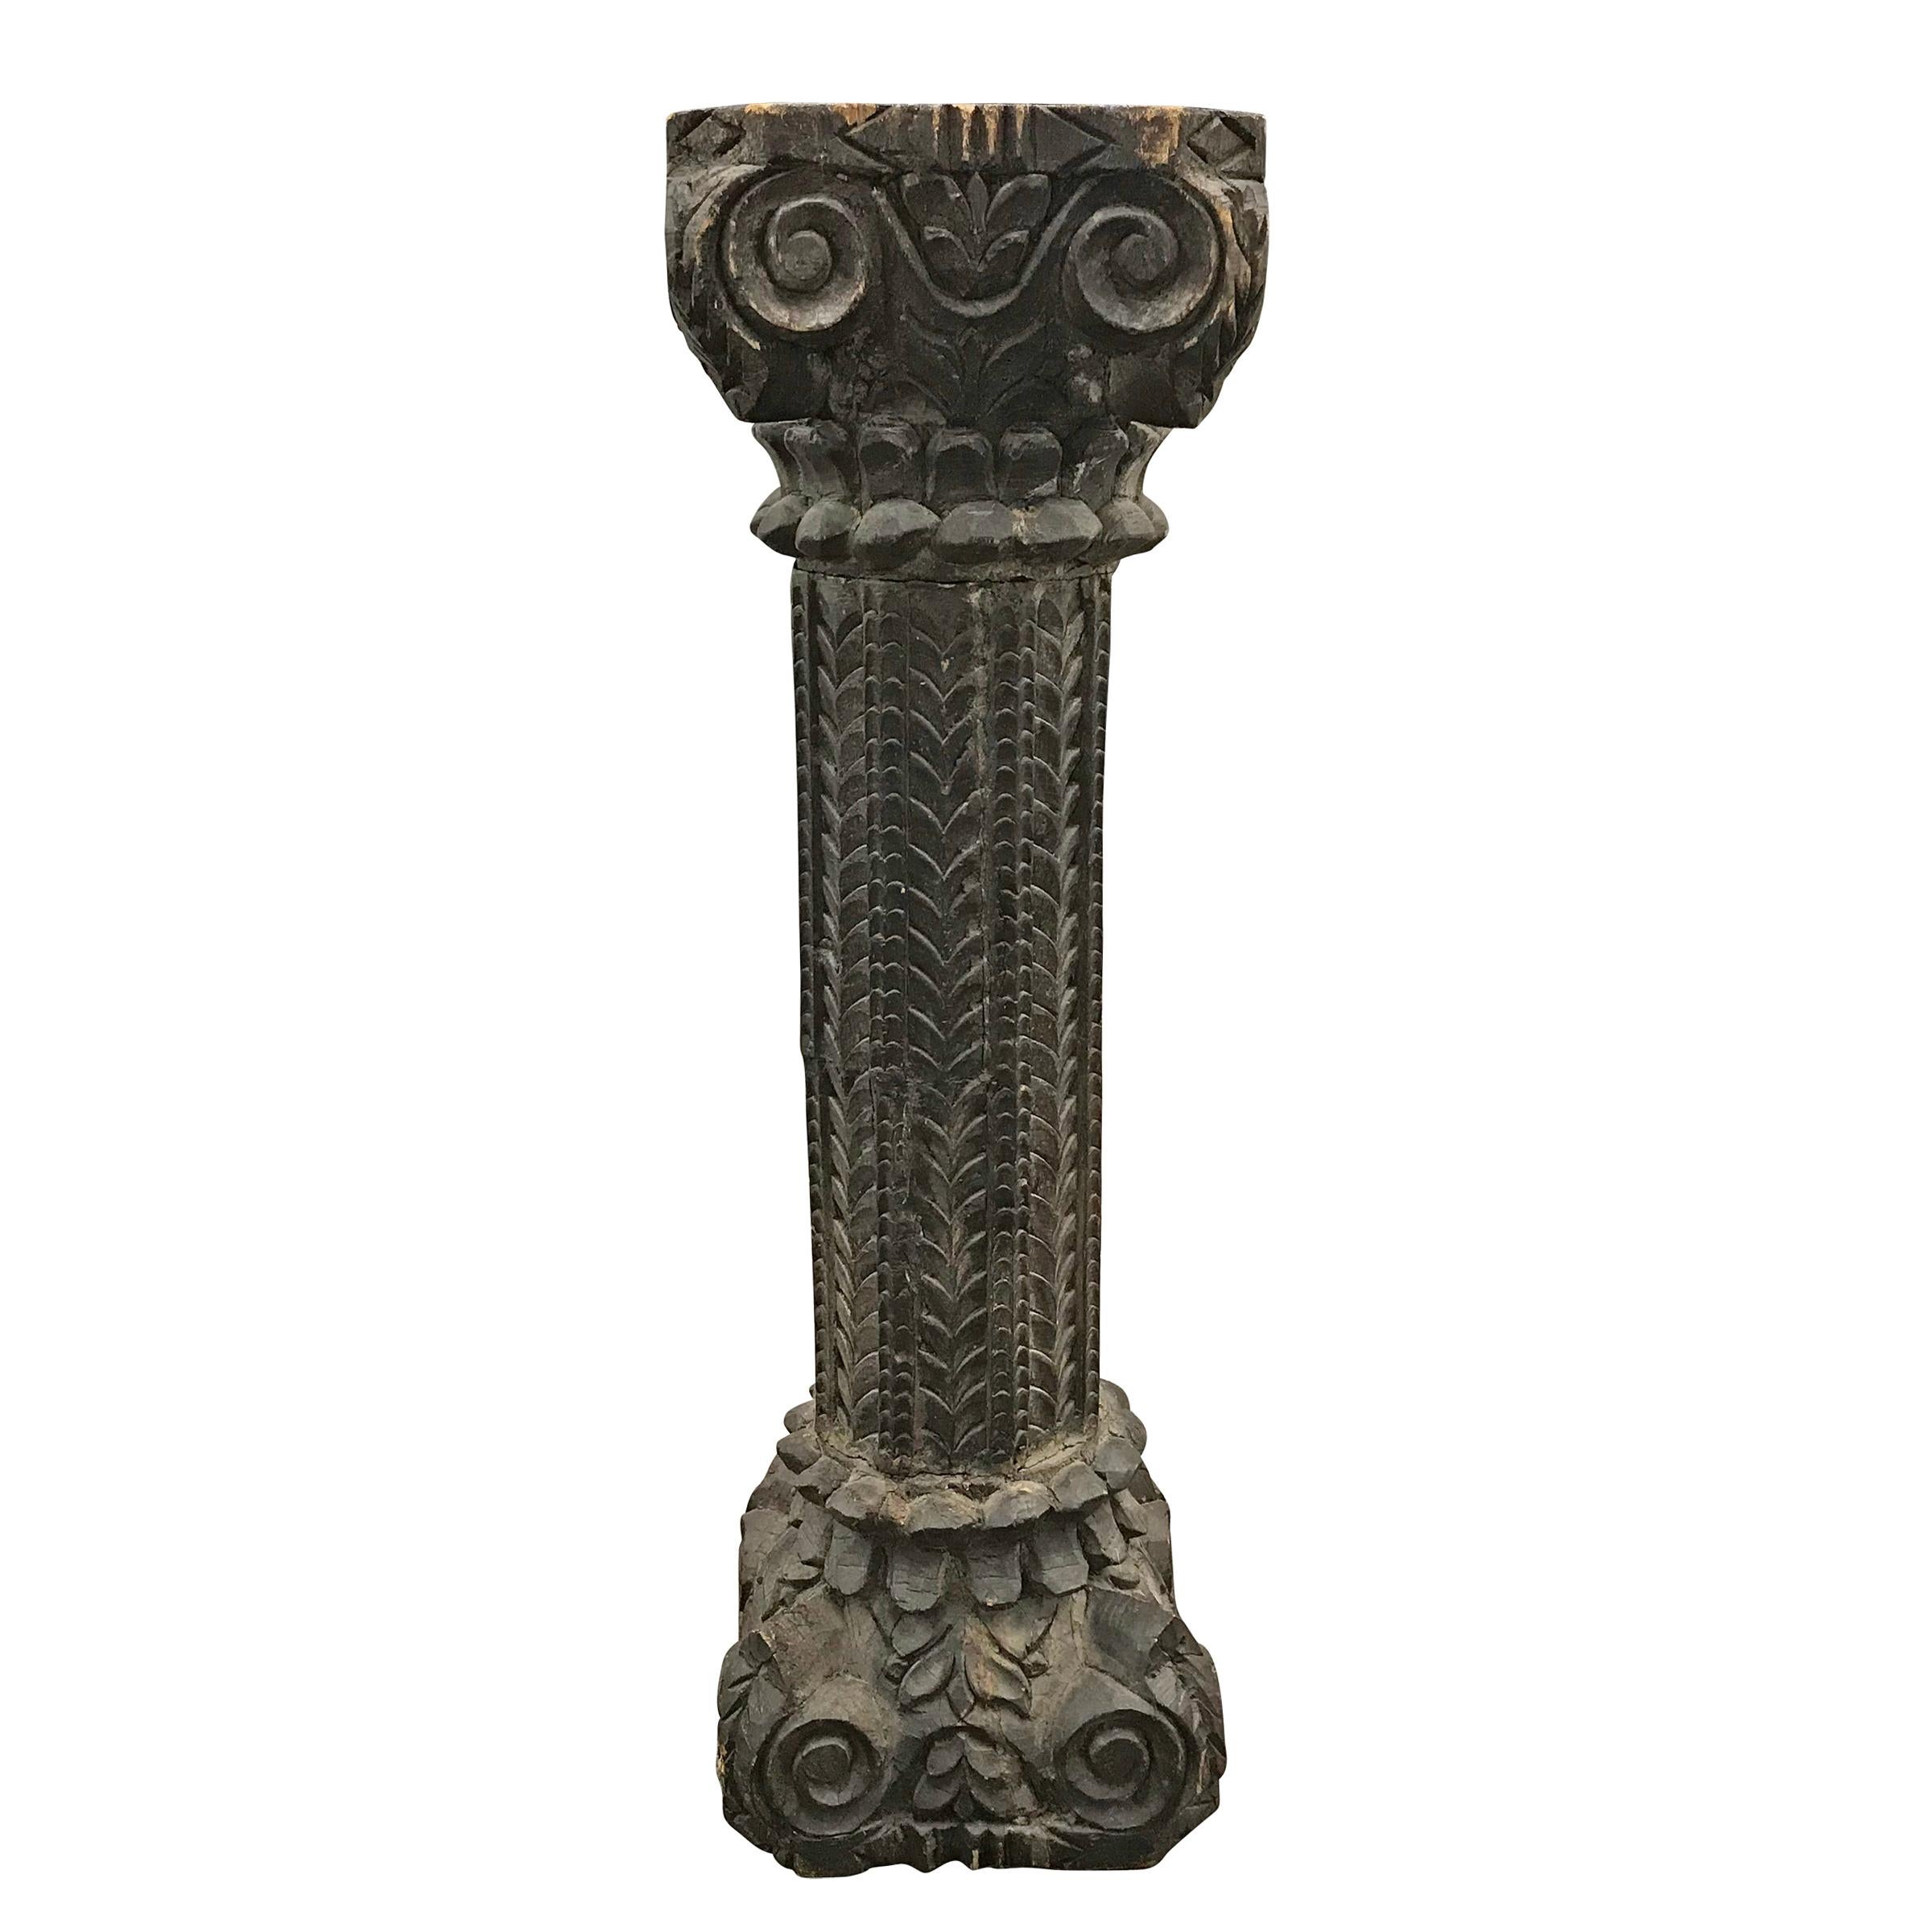 A 19th century Indian wood stylized ionic column with carved floral capital and base, and a wonderfully stylized central column. This probably adorned a large home, where multiple columns, figures and floral carved panels would have provided an